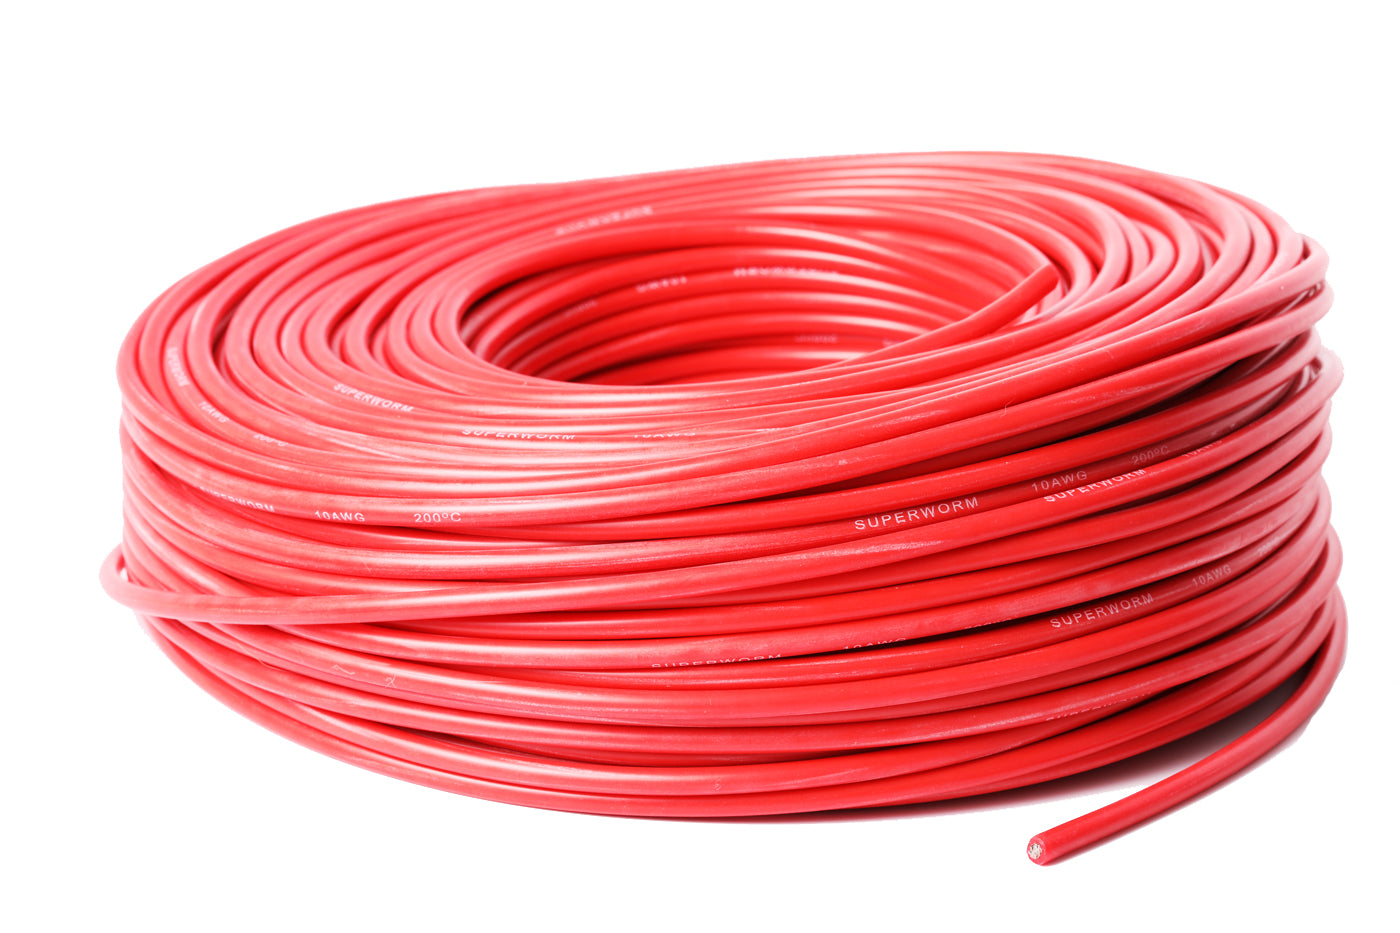 12 Gauge flexible silicone copper wire test lead hookup wire